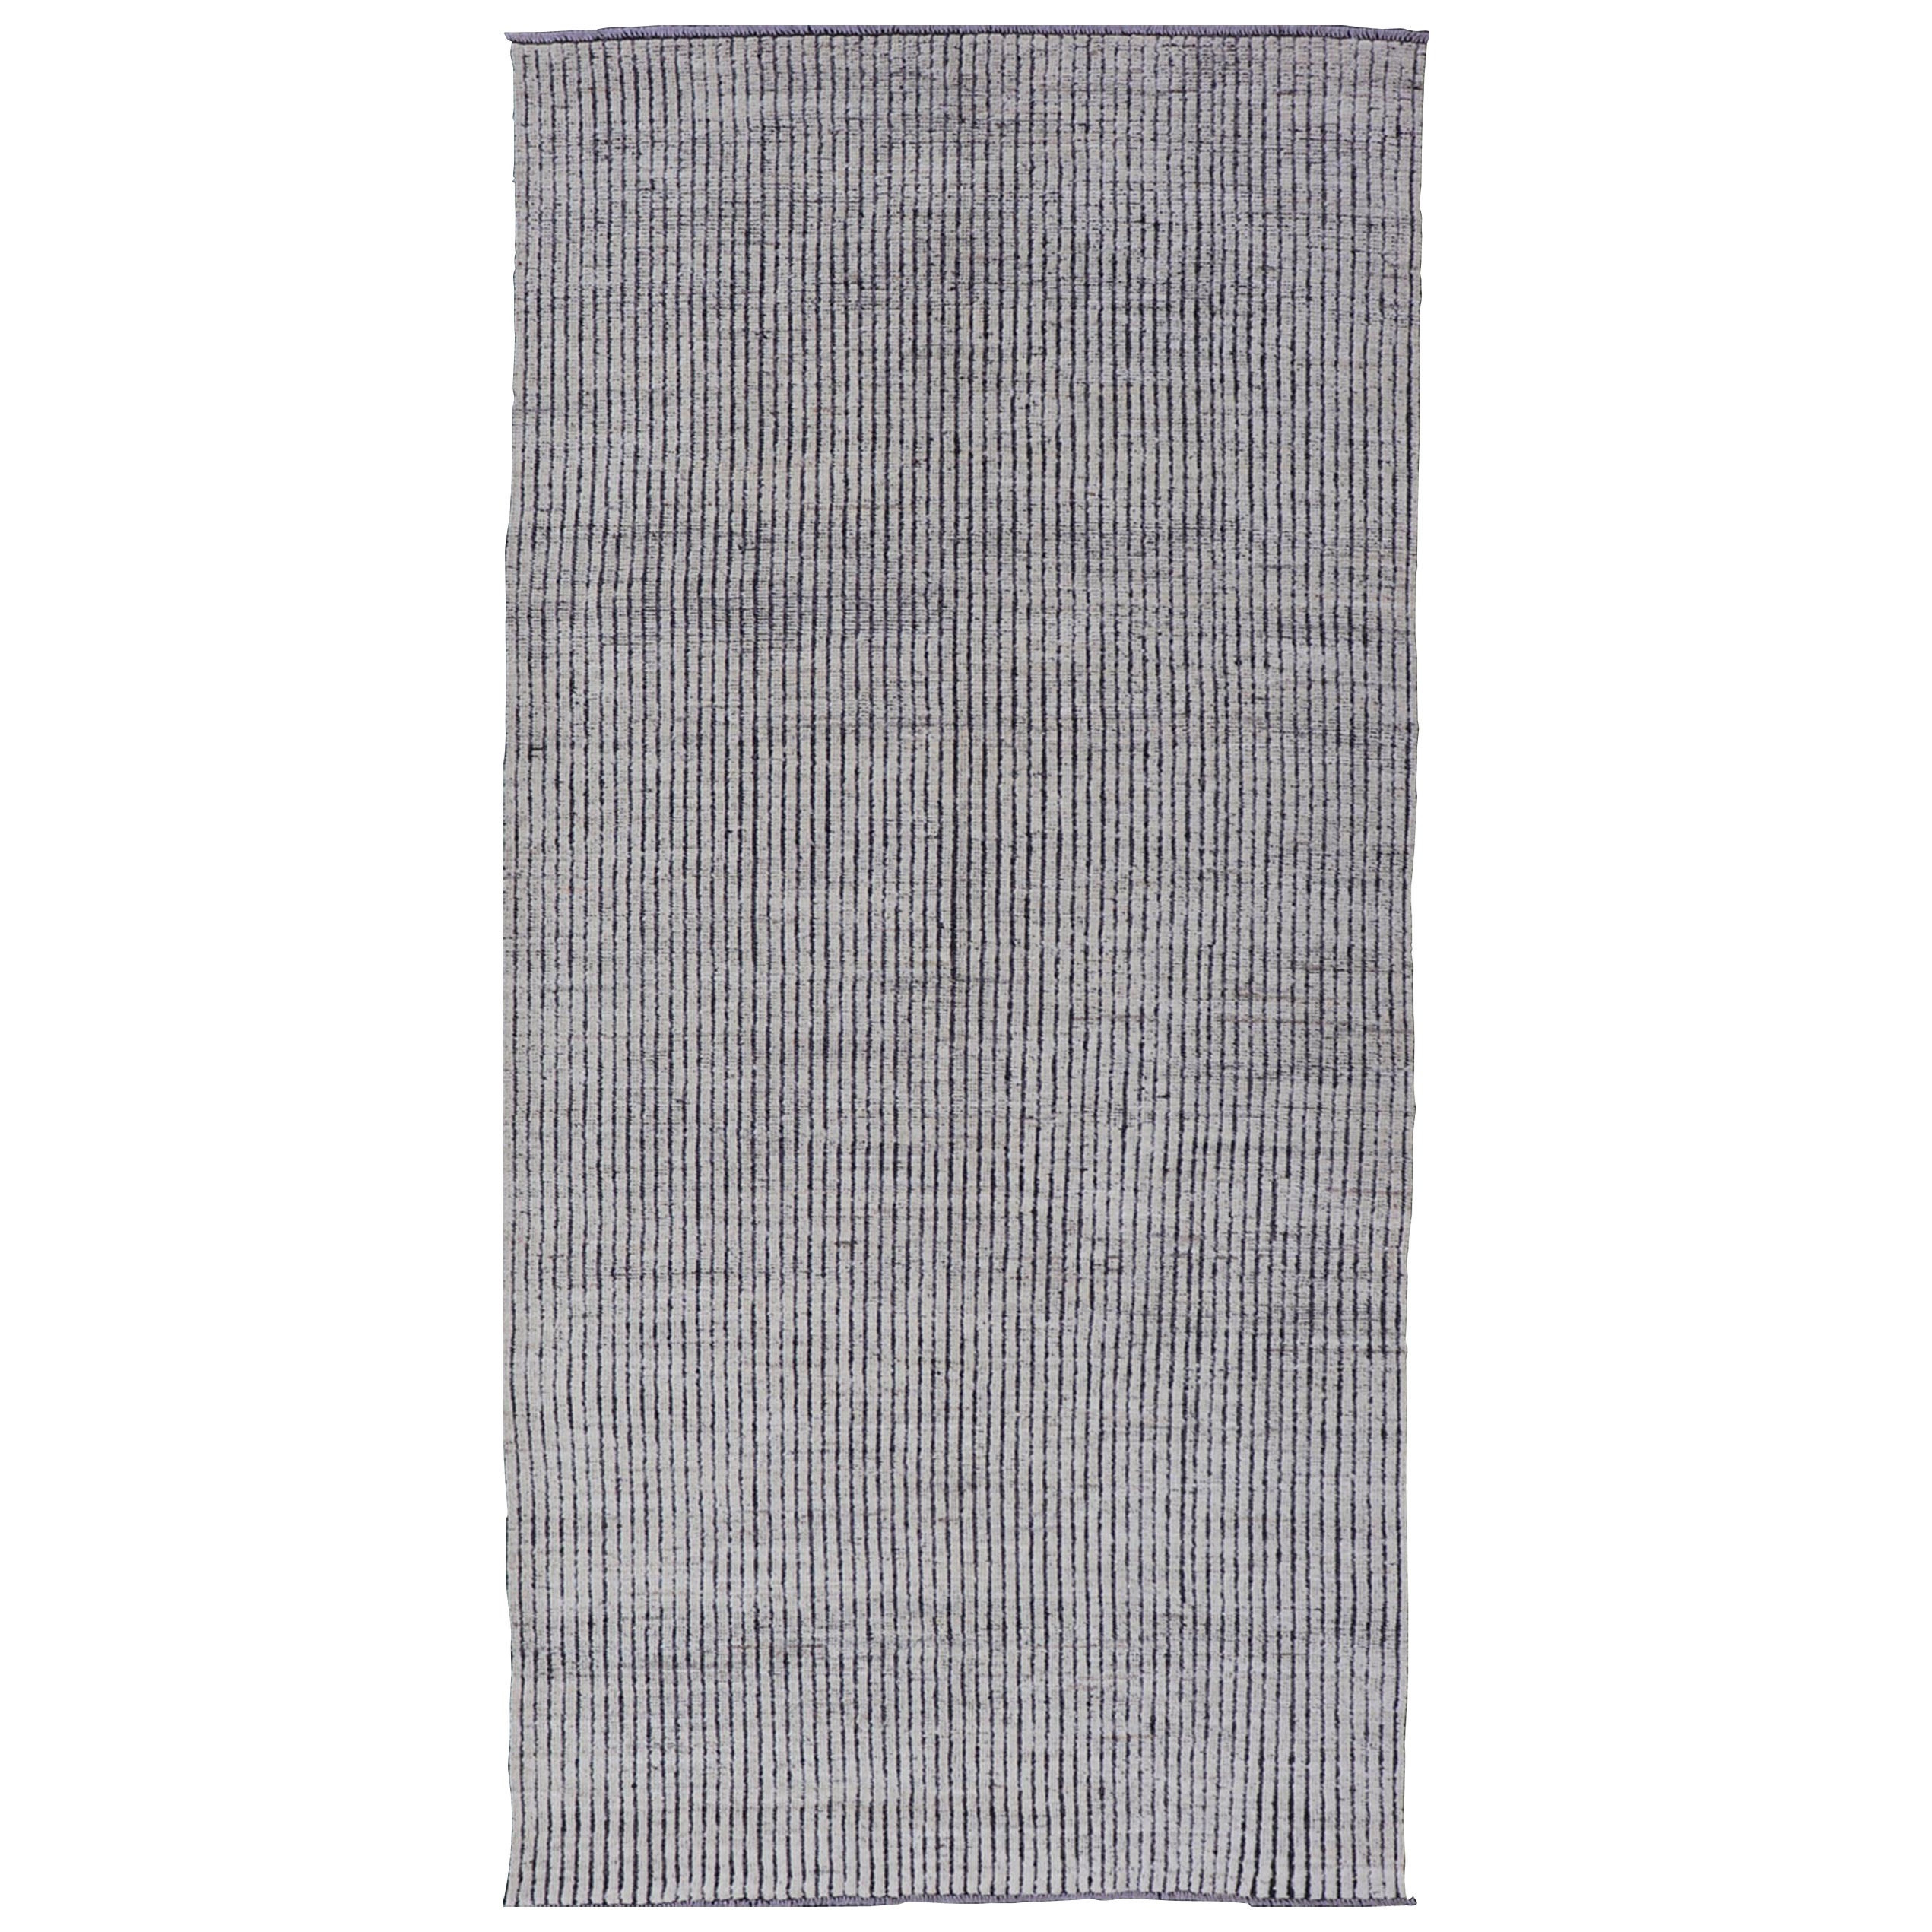 Modern Gallery Rug in White and Black background and Distressed Texture For Sale